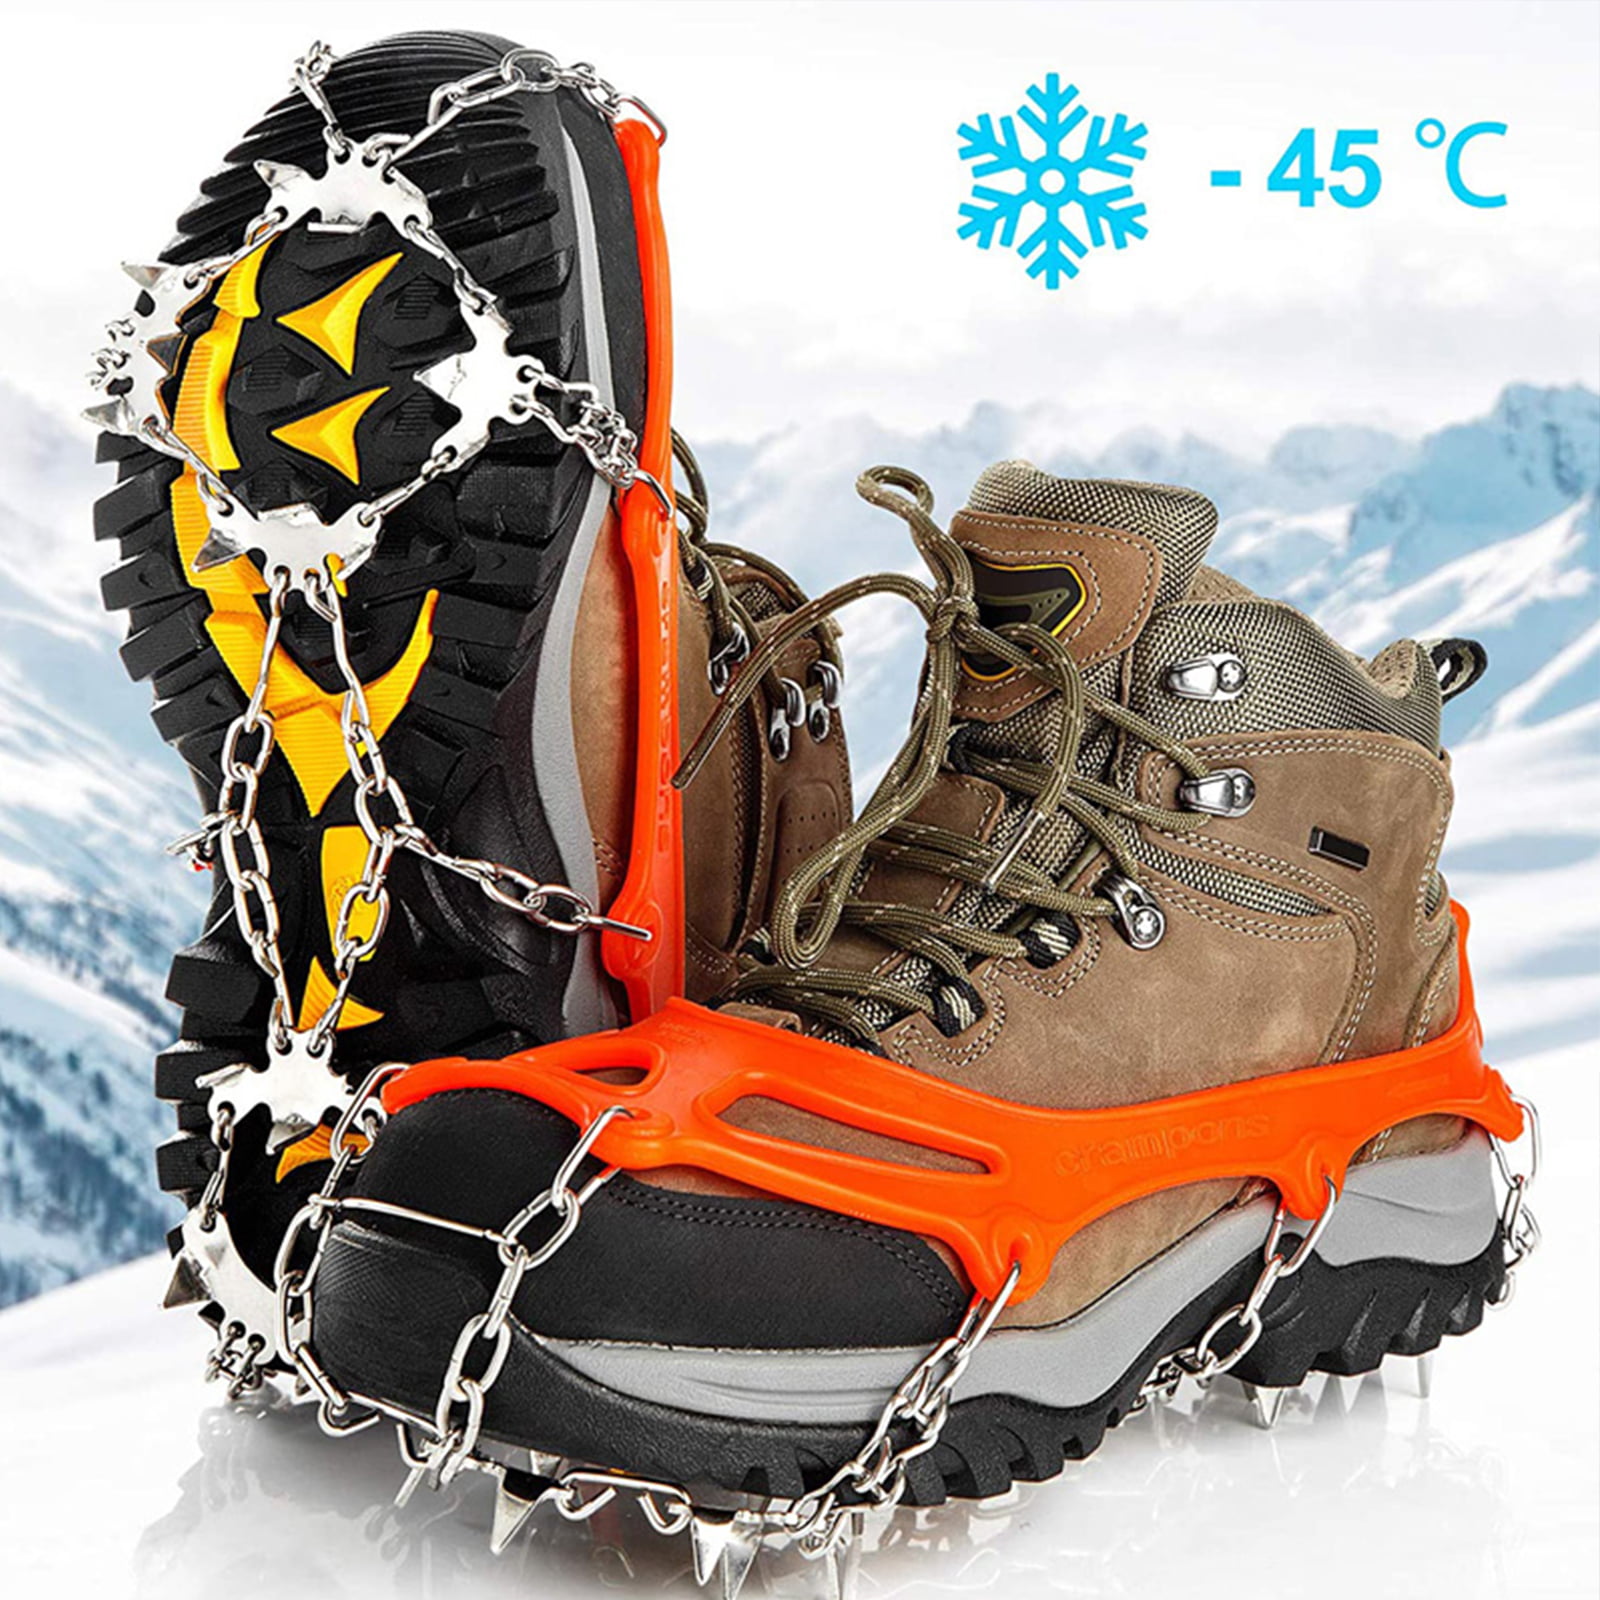 Outdoor Ice Snow Climbing Sport Anti Slip Shoe Spikes Crampon Grips Cleats Cover 